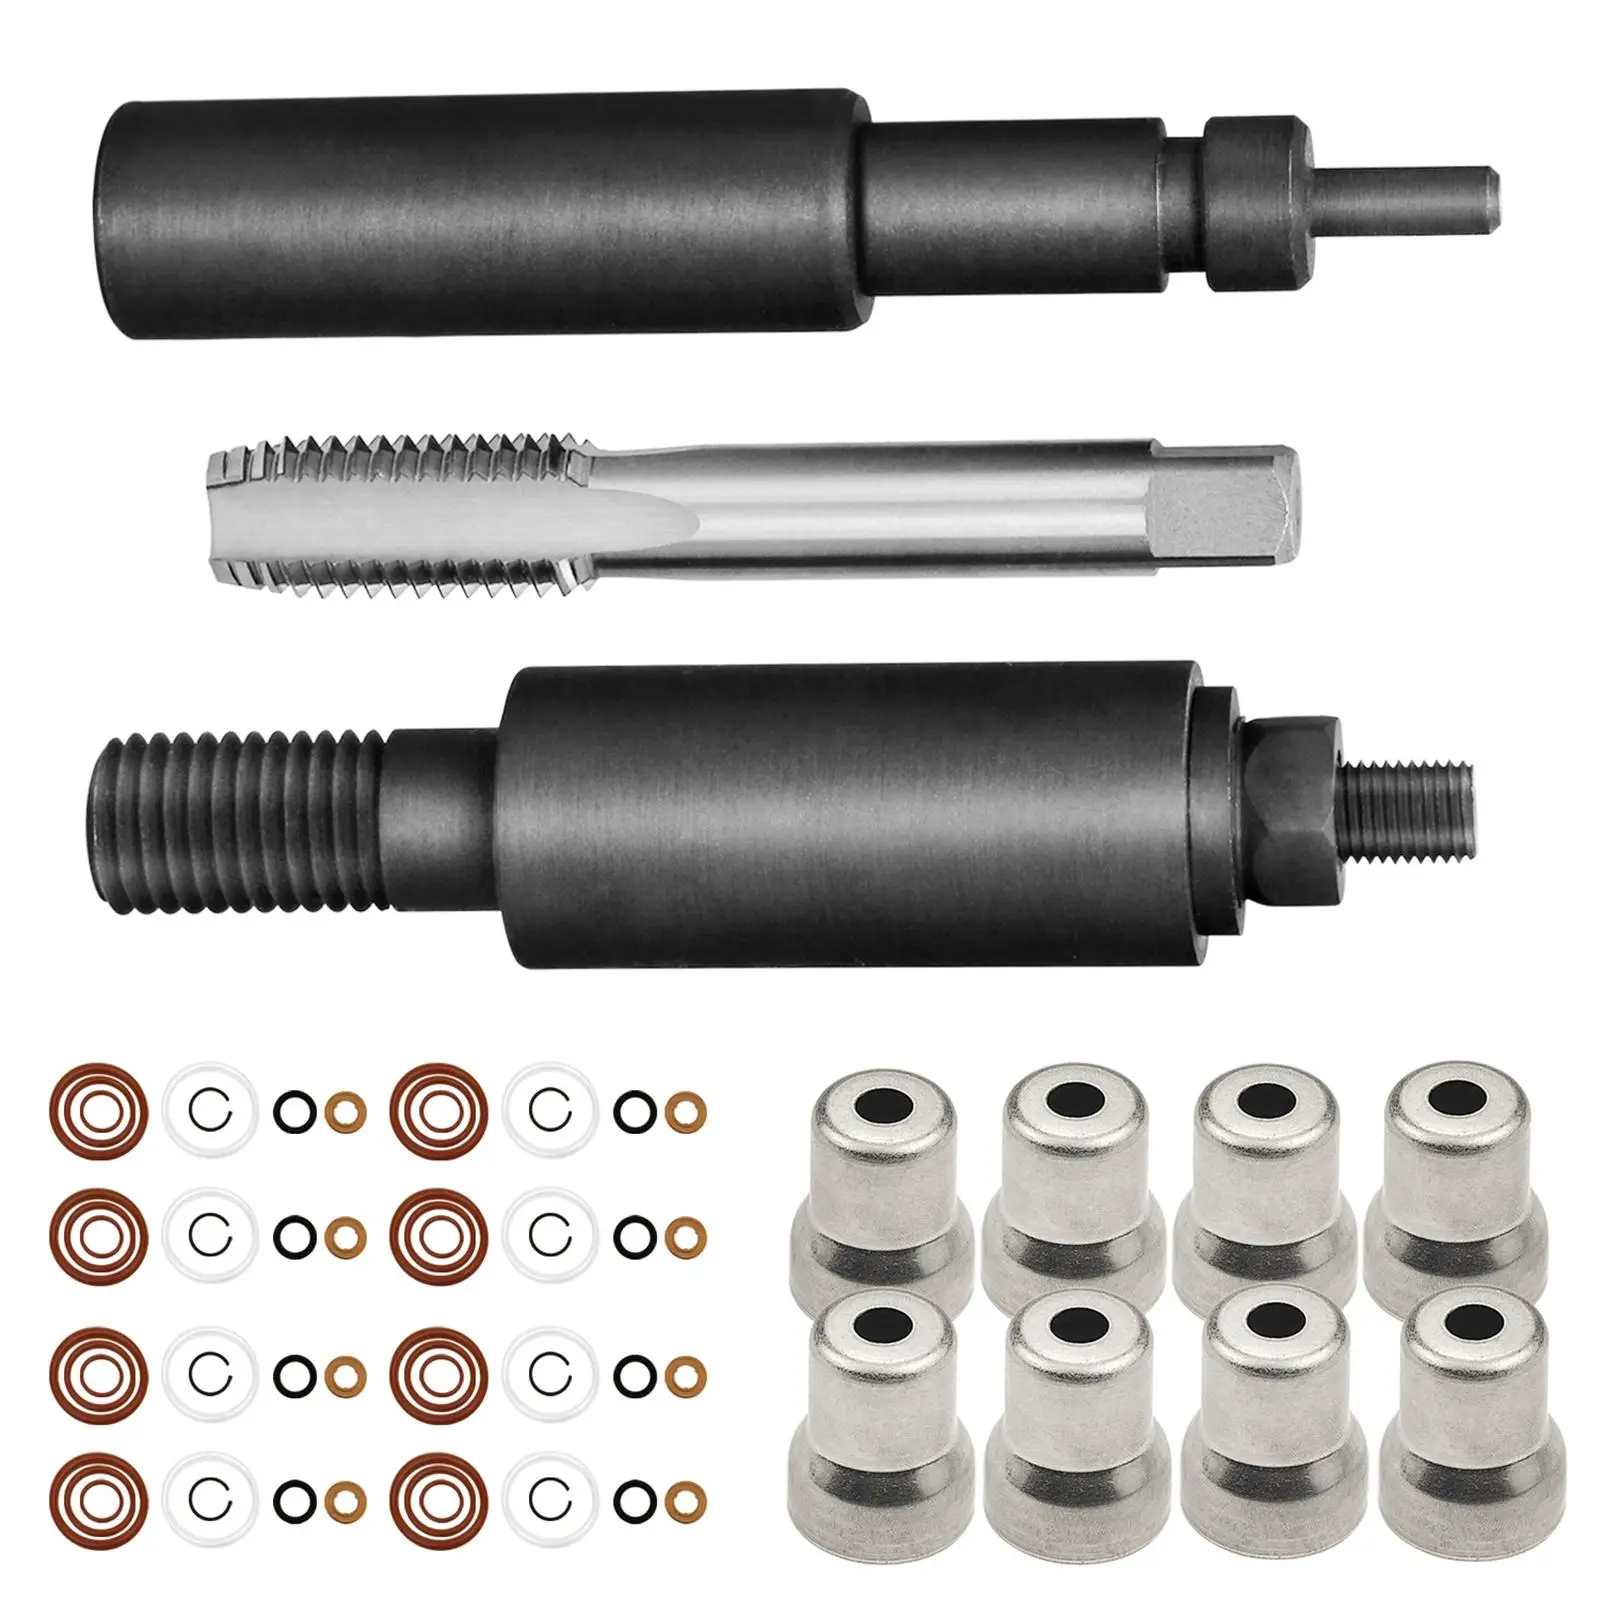 Fuel Injector Sleeve Puller Installer Set Spare Parts with Cups and Rings for Ford 6.0L Easily to Install Premium